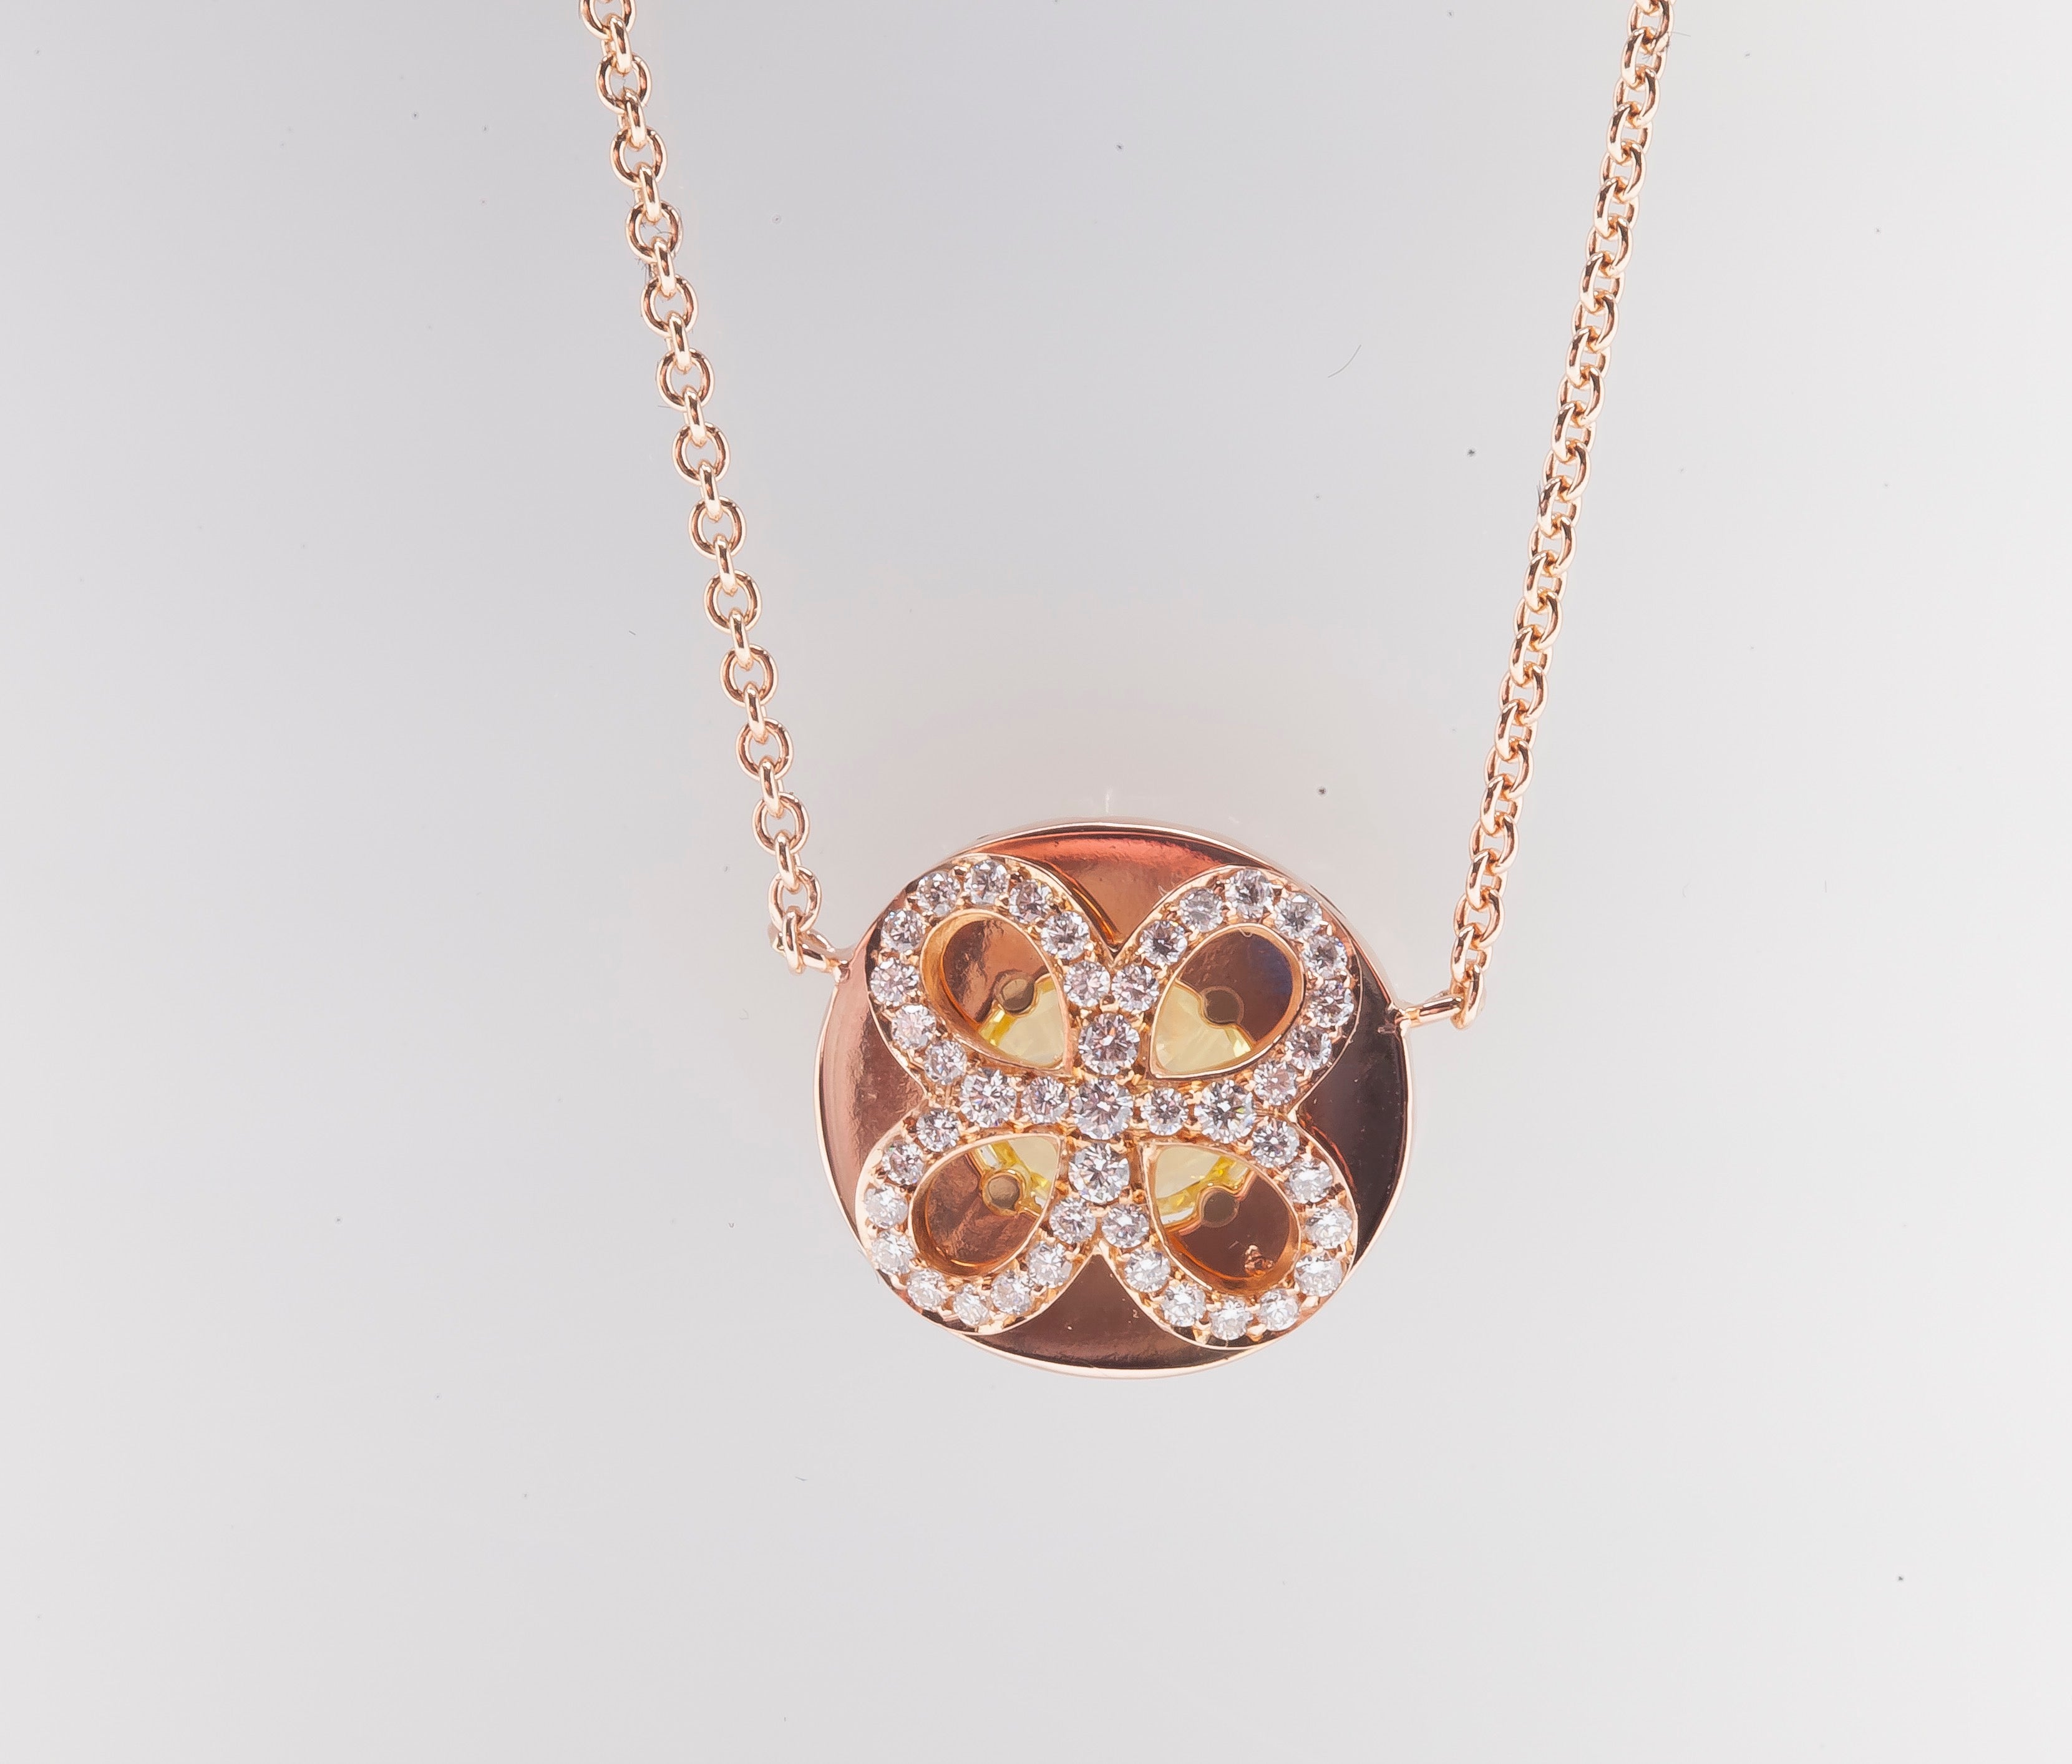 Four-leaf clover pendant with colorless melee diamonds and hollow middle to see the yellow diamond from the other facet